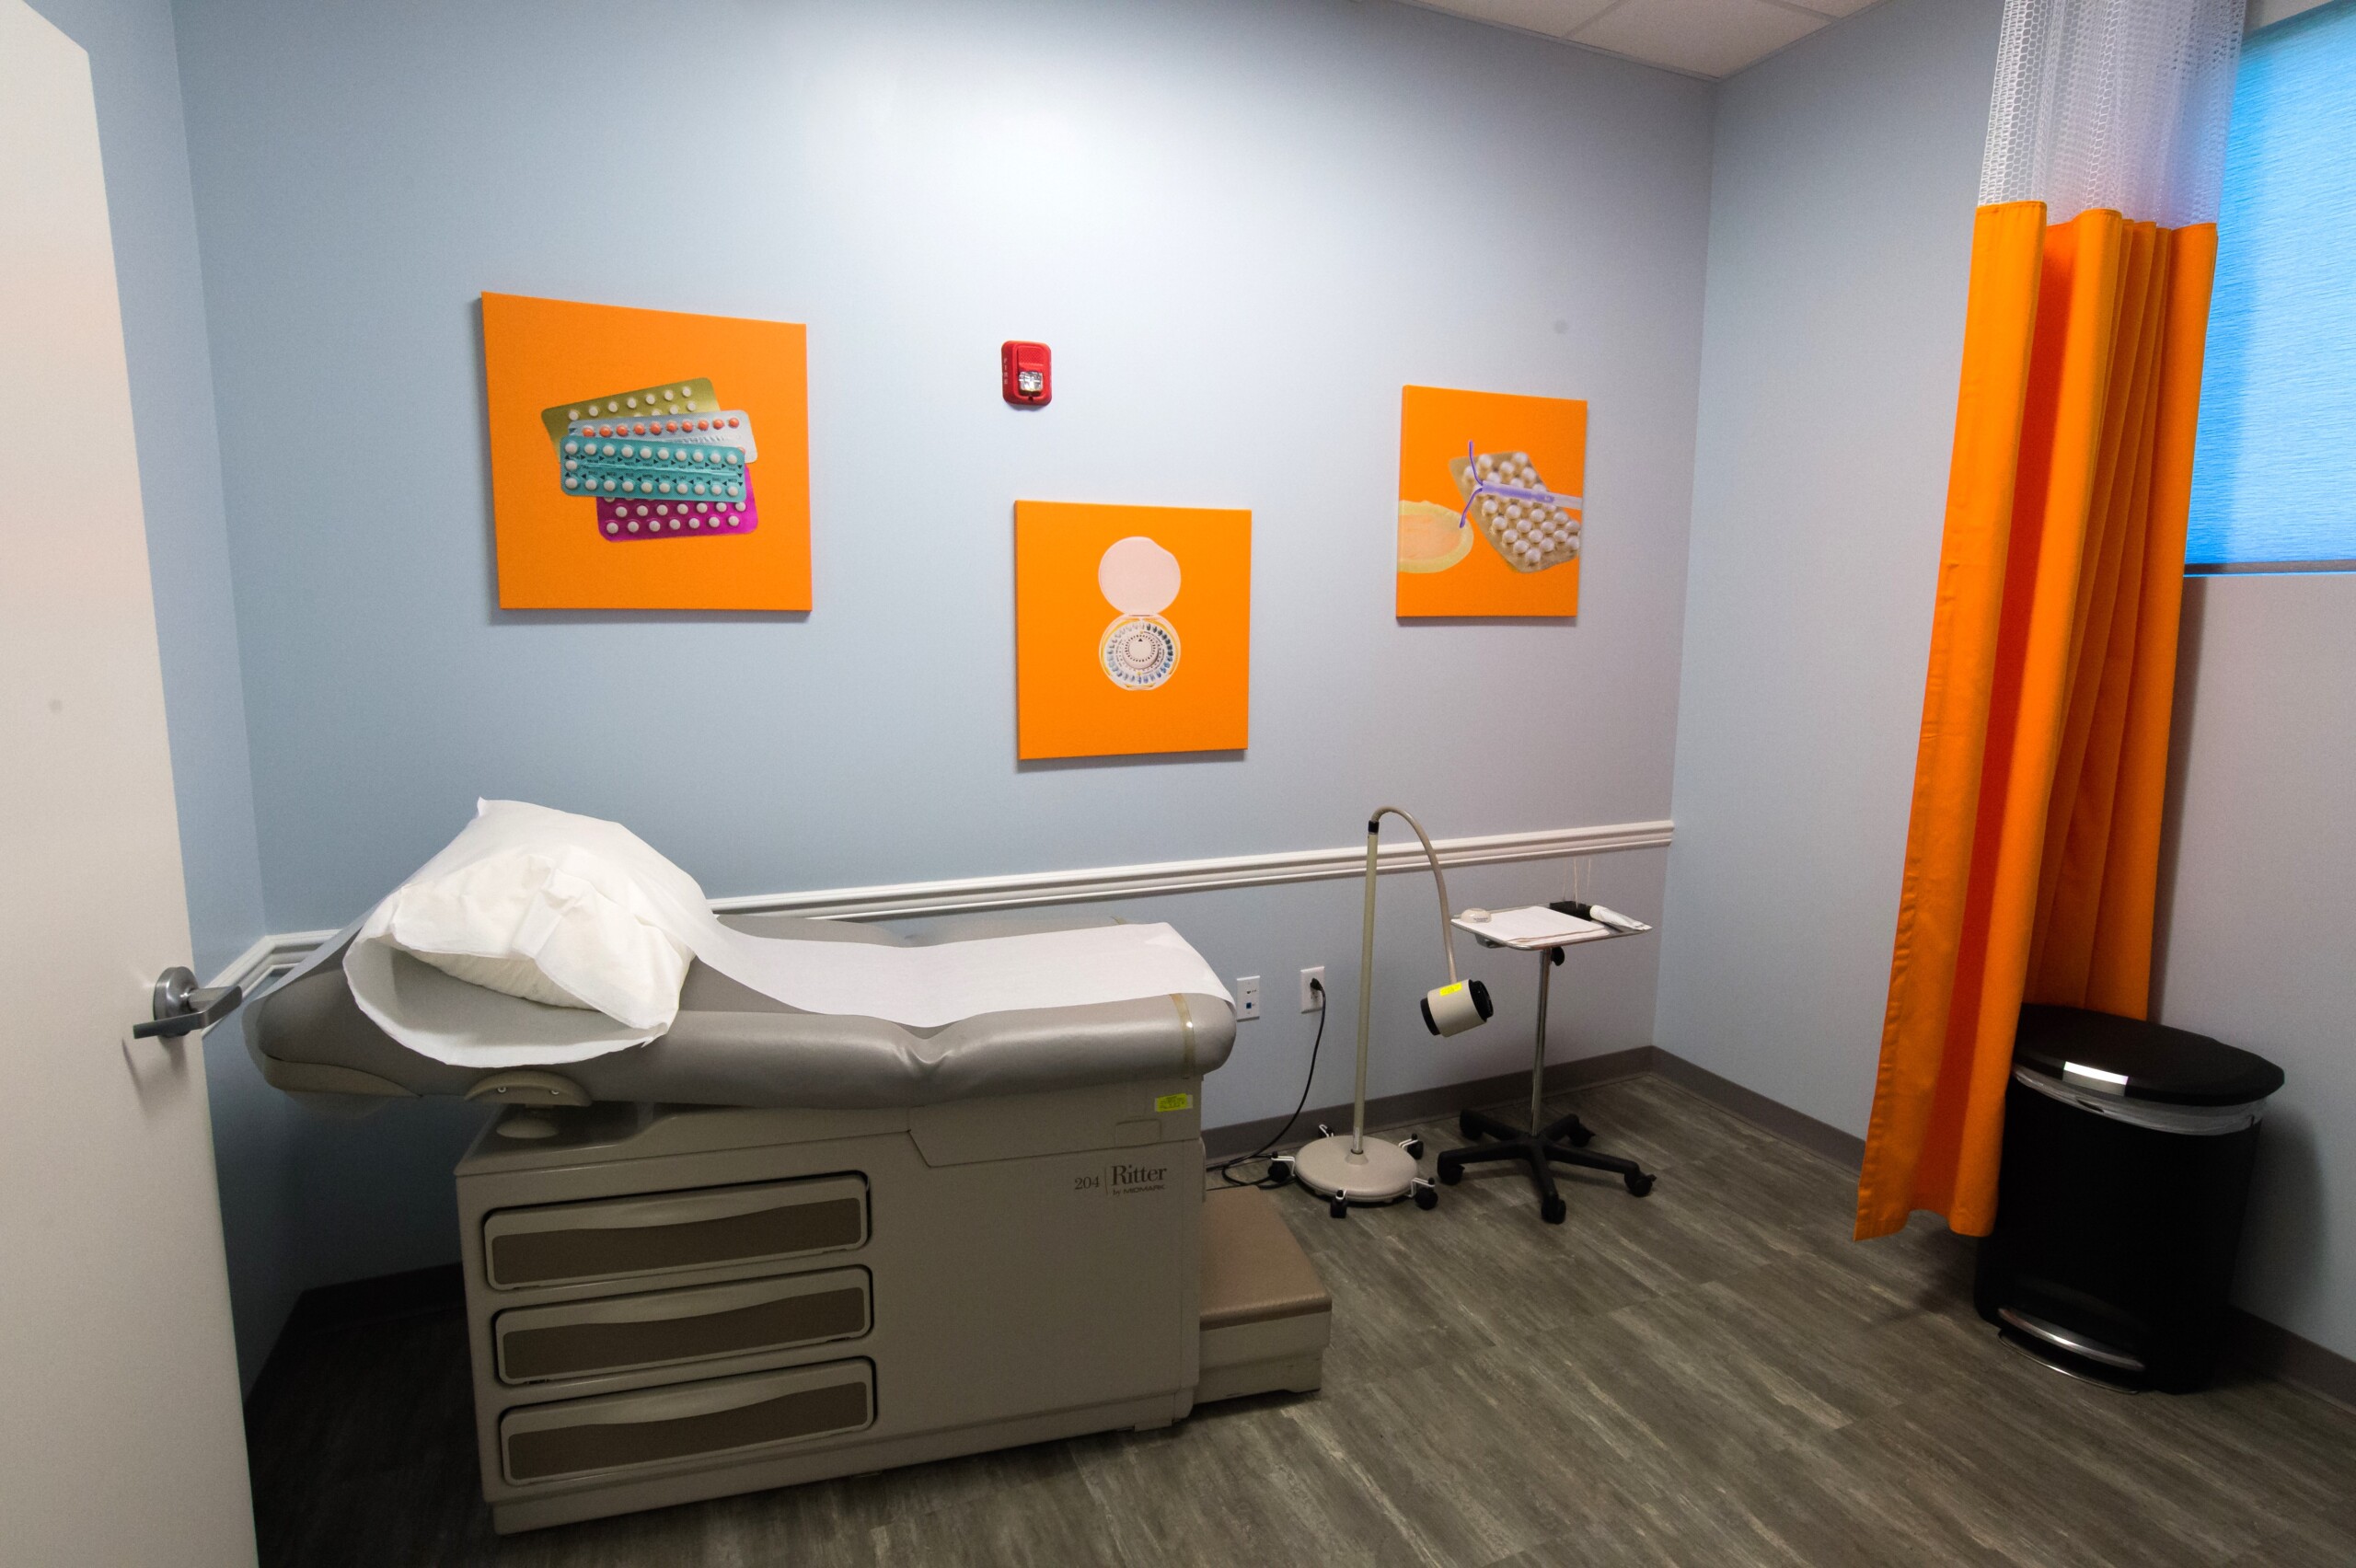 Patients often have to wait four to five weeks for an appointment at Planned Parenthood's Tallahassee health center due to increased demand, officials said. | Colin Abbey, Planned Parenthood Of South, East And North Florida